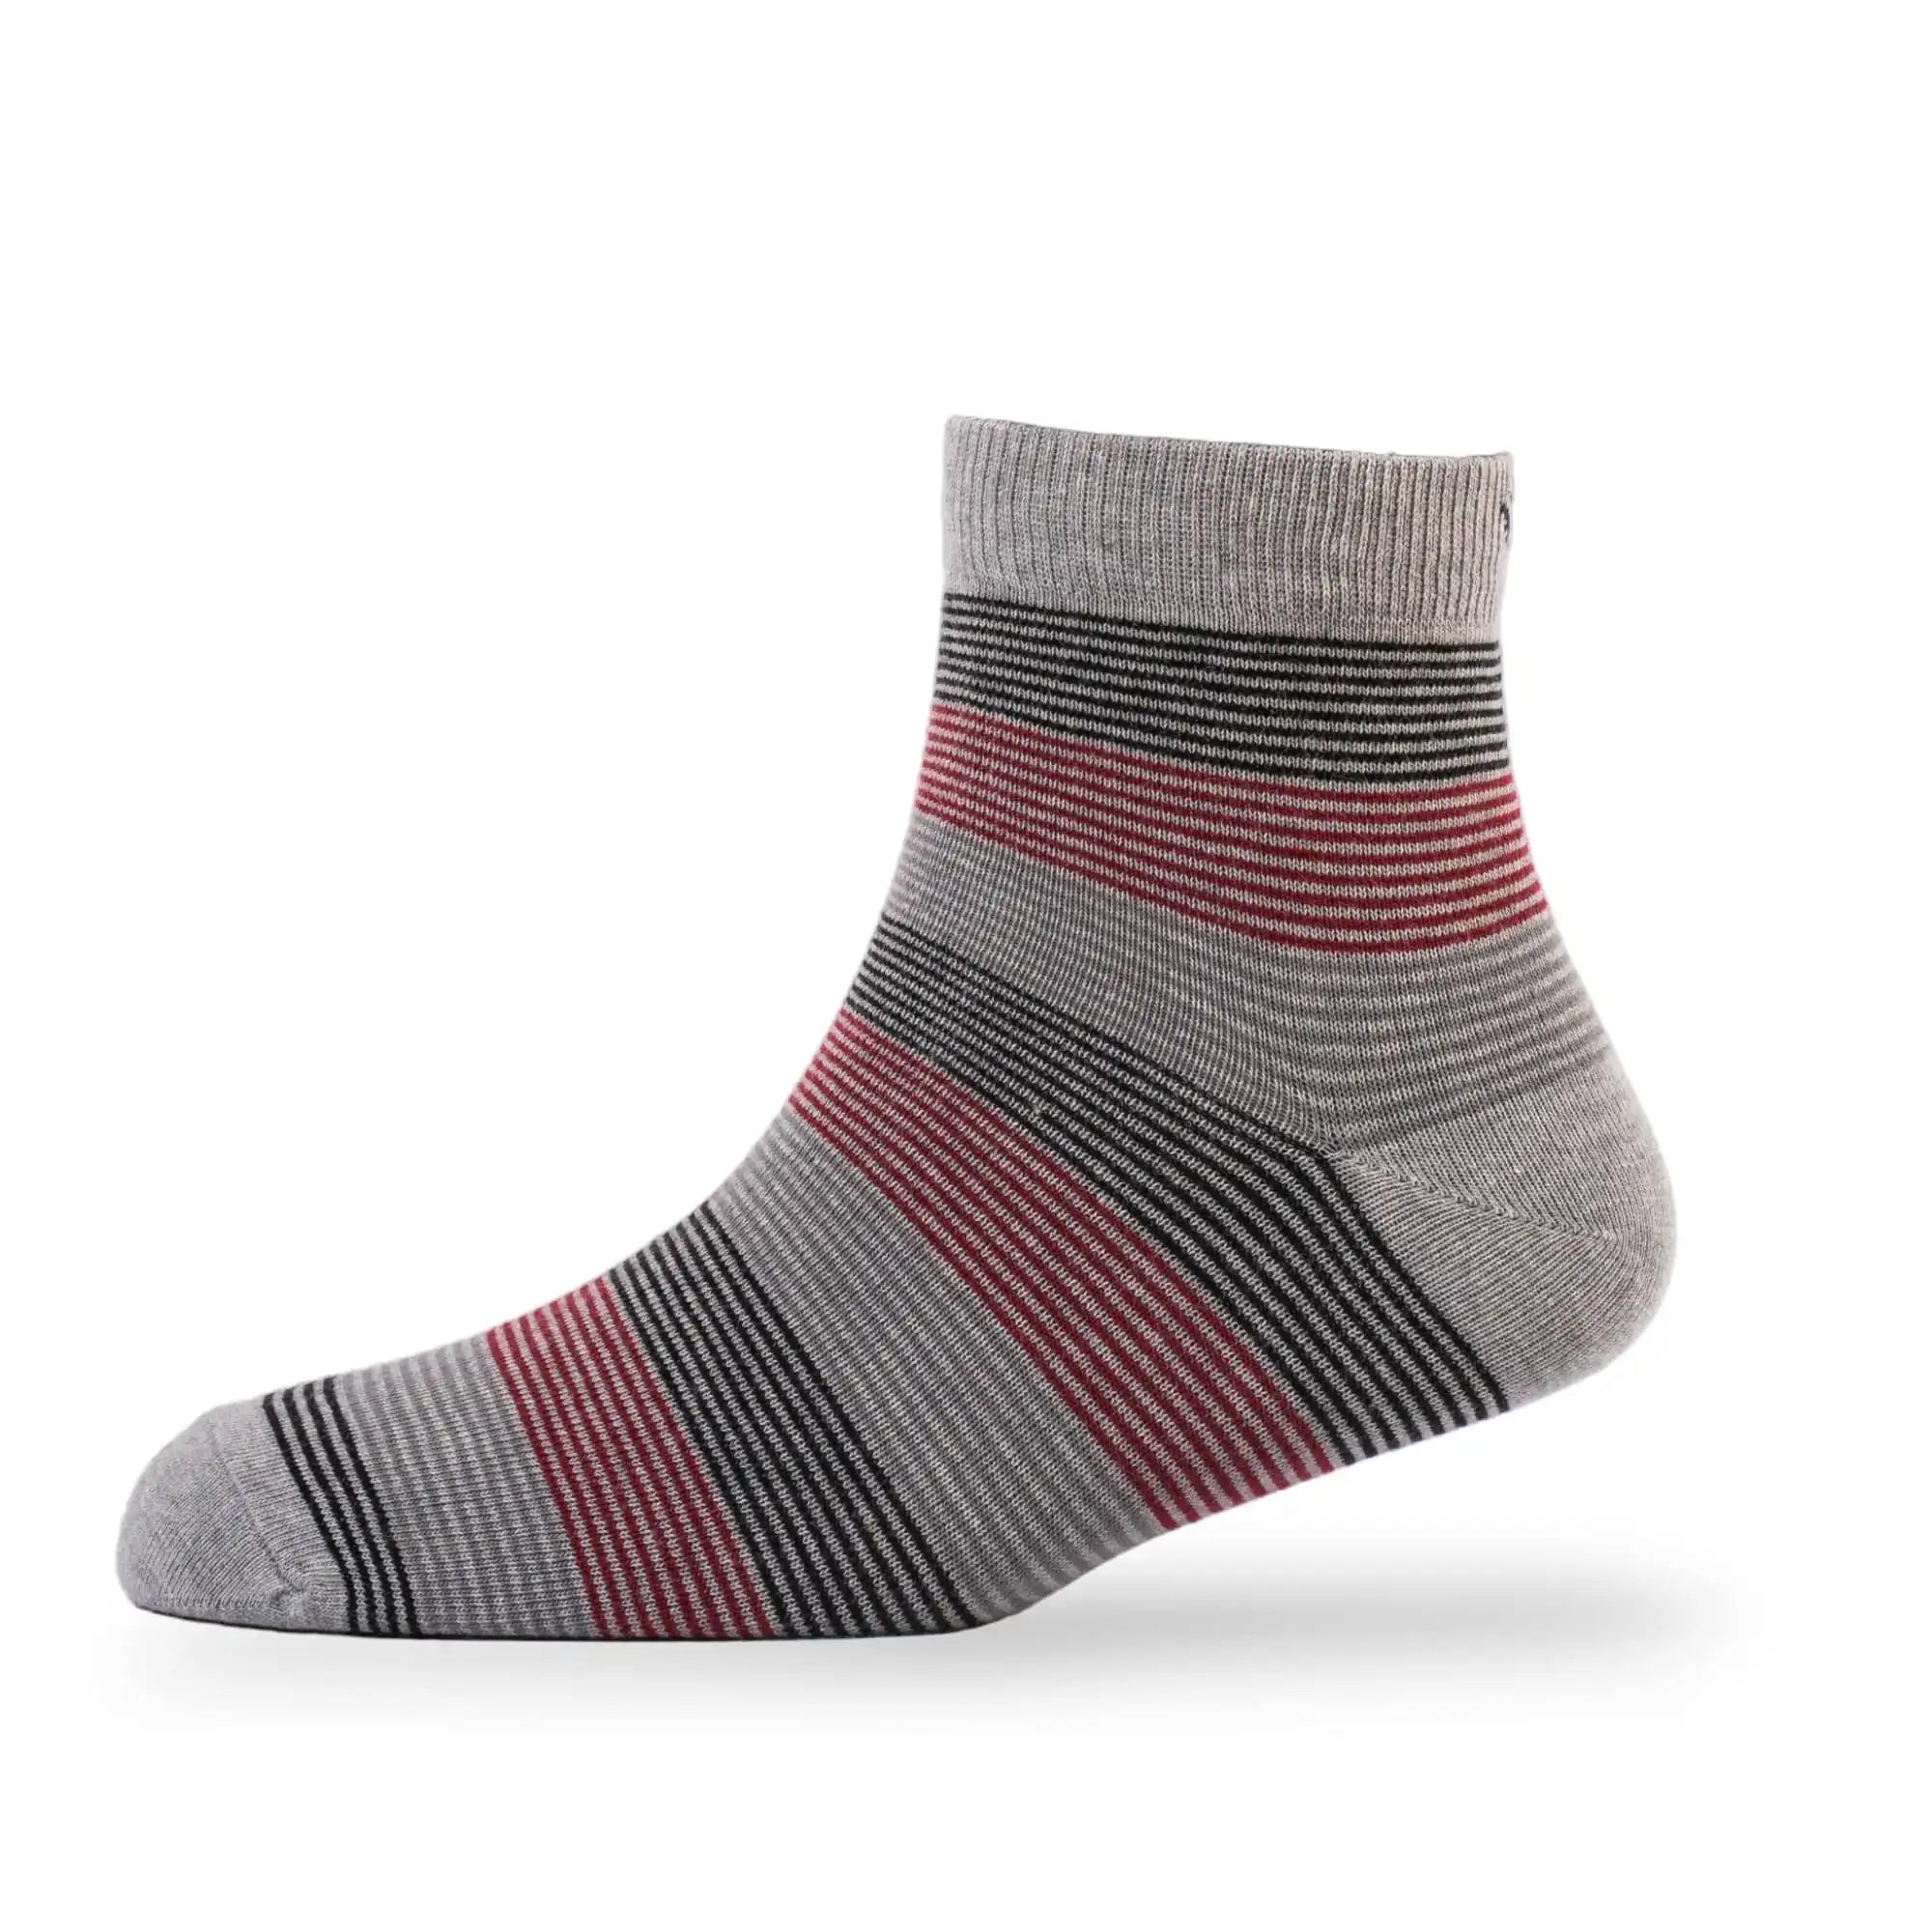 Young Wings Men's Multi Colour Cotton Fabric Design Ankle Length Socks - Pack of 5, Style no. 2728-M1